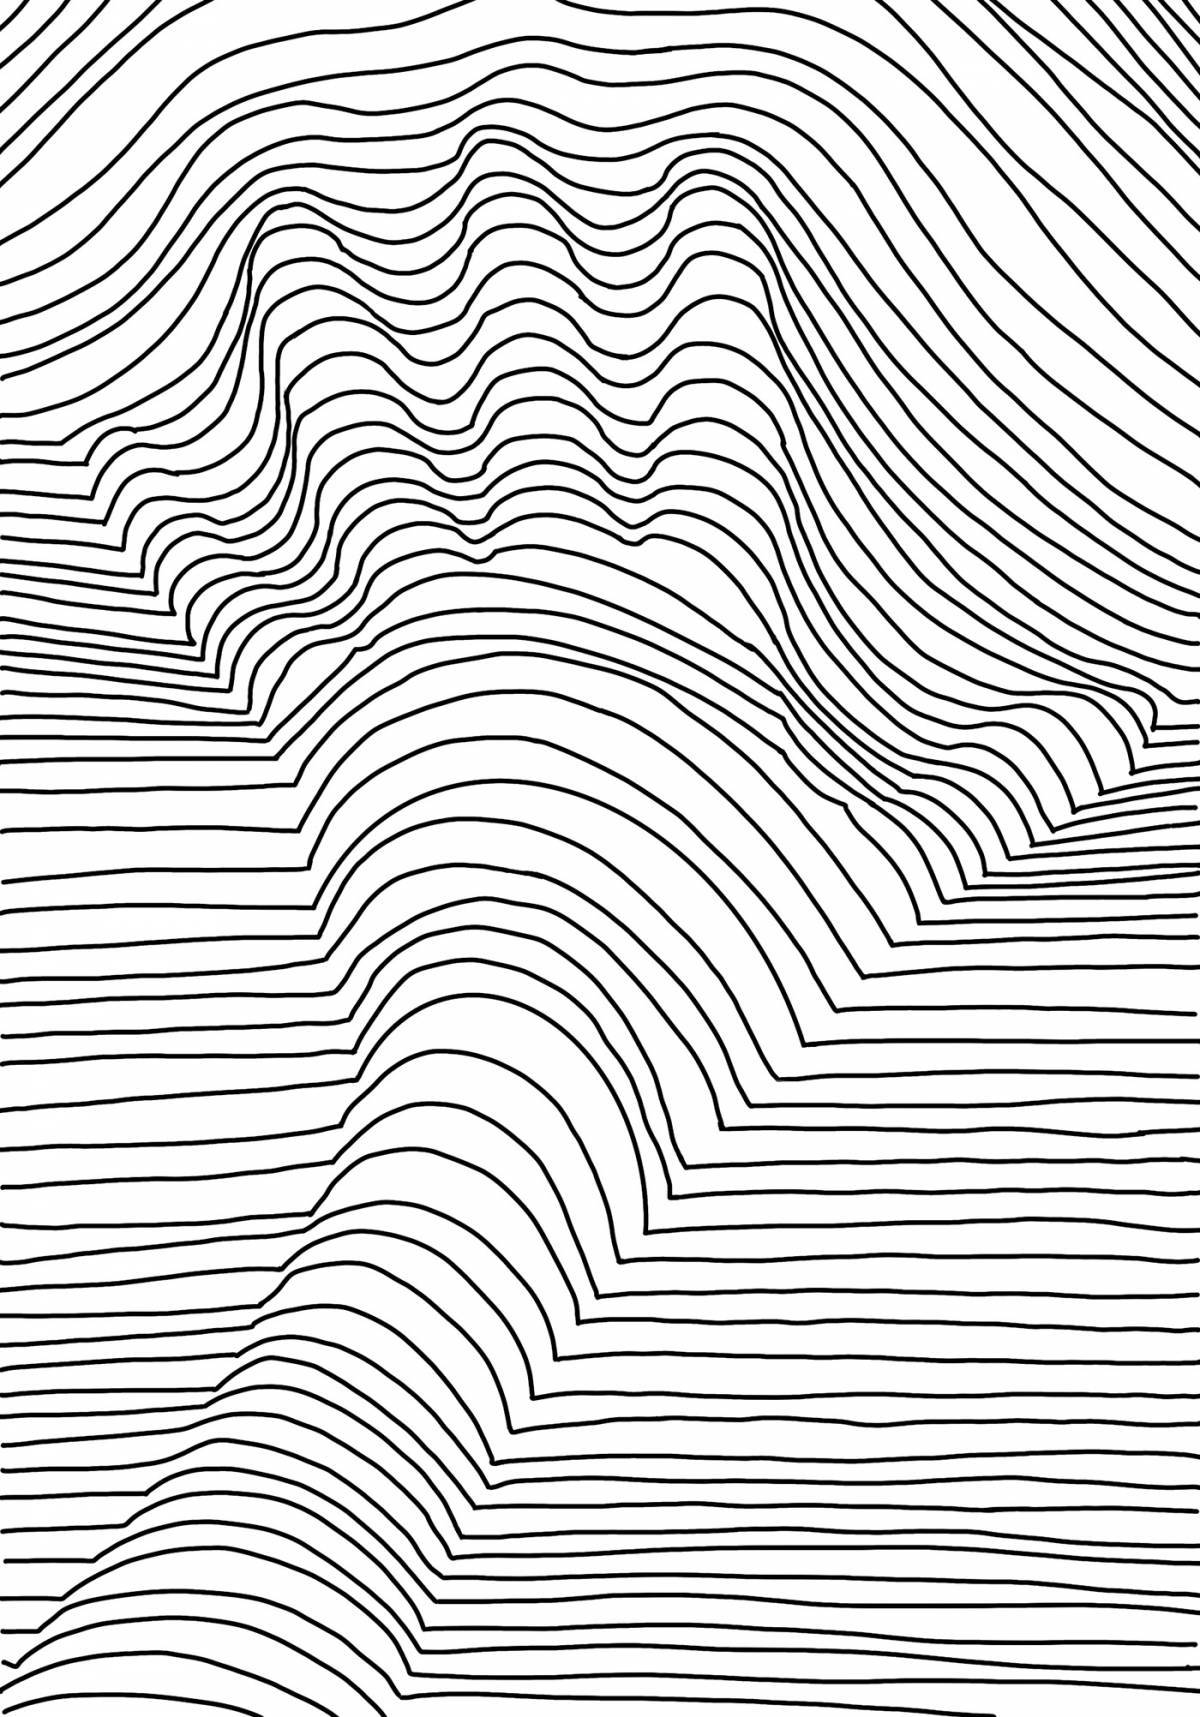 Coloring page with amazing spiral pattern